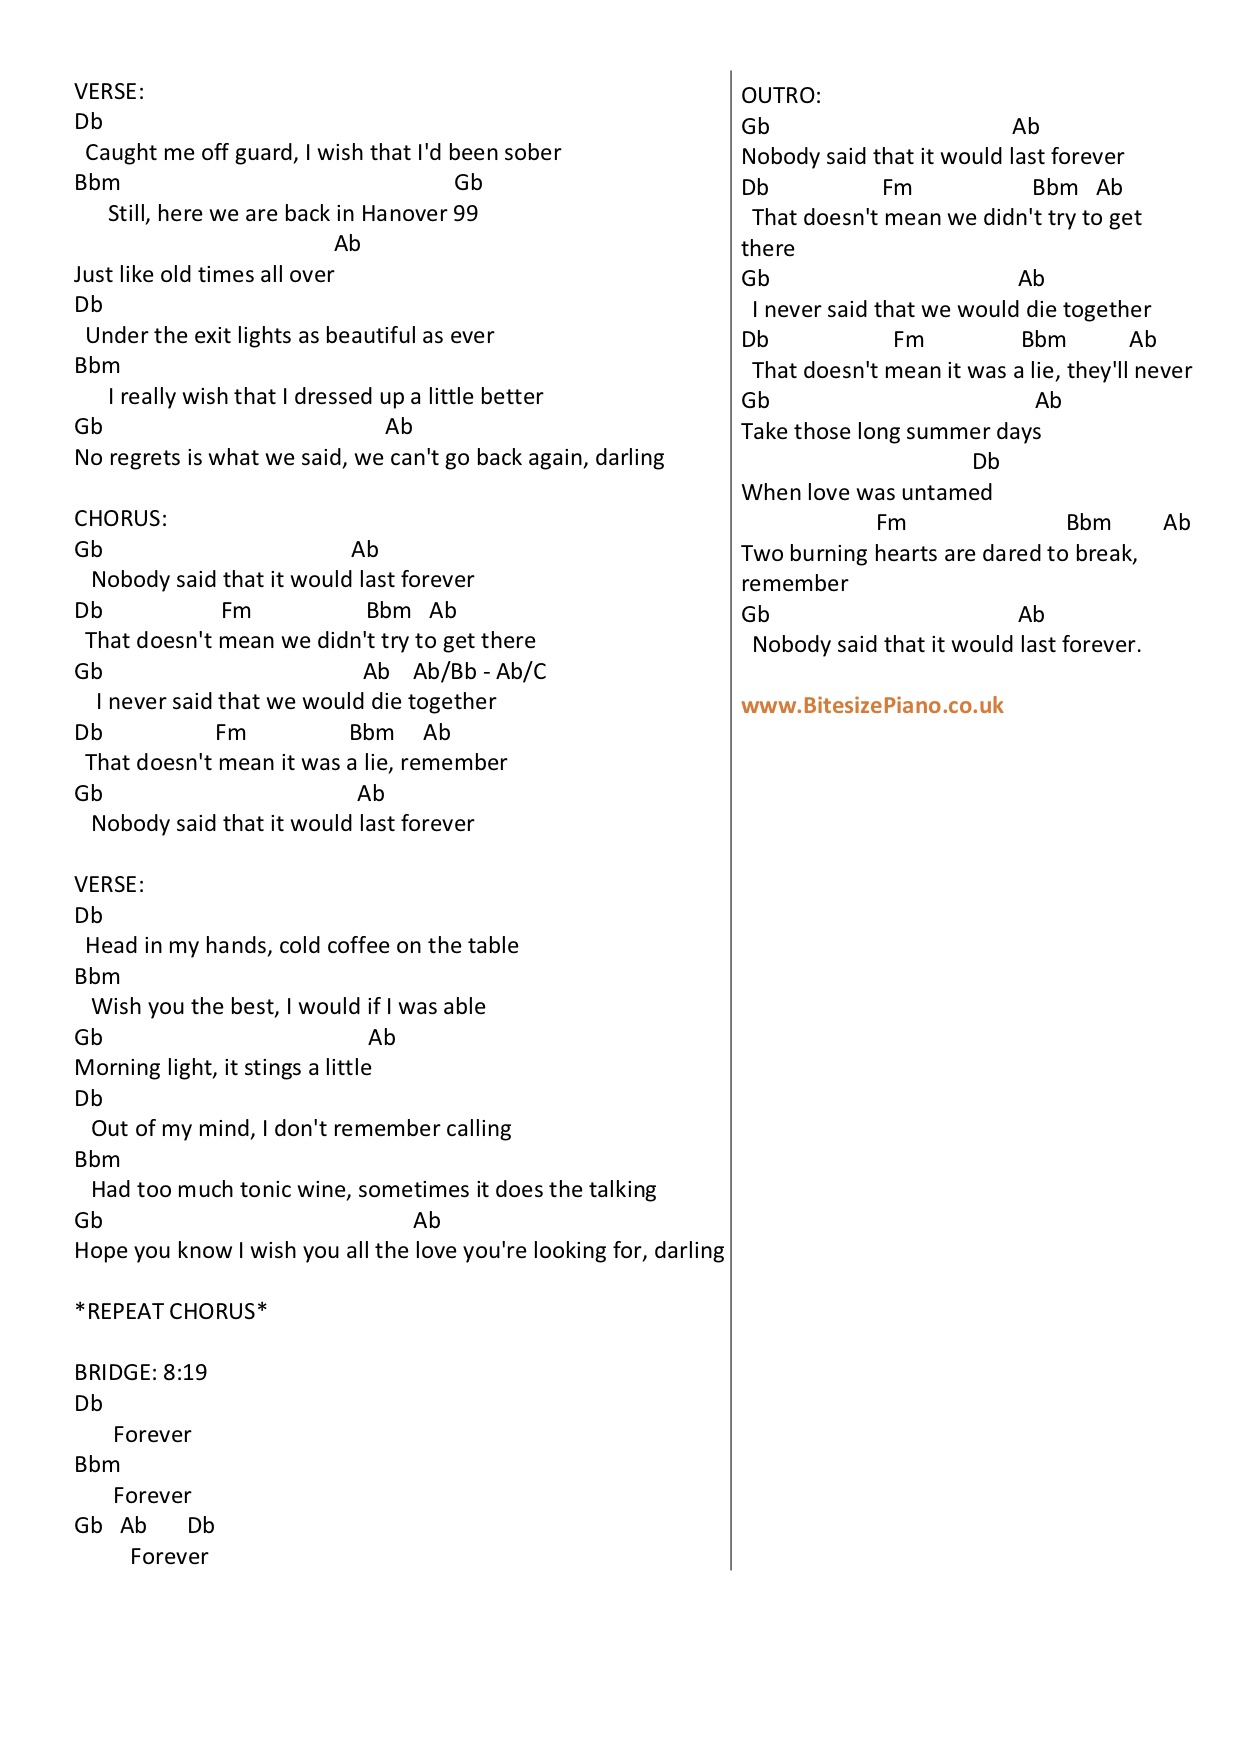 Forever Lewis Capaldi Piano Chords Lyrics Bitesize Piano Sheet music arranged for piano/vocal/guitar, and singer pro in c# minor (transposable). forever lewis capaldi piano chords